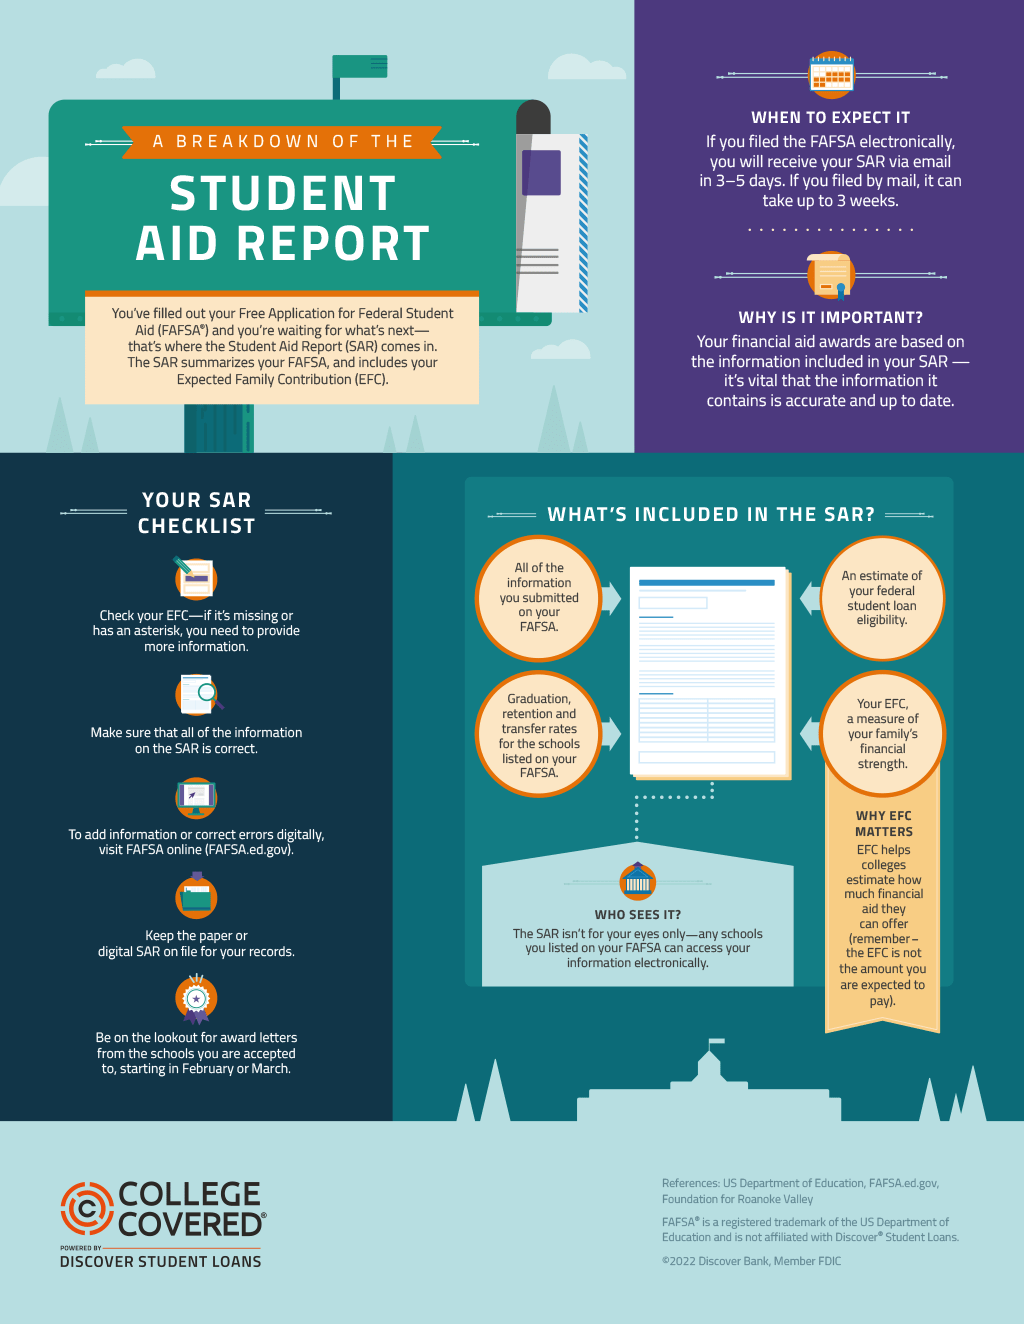 A Breakdown of the Student Aid Report